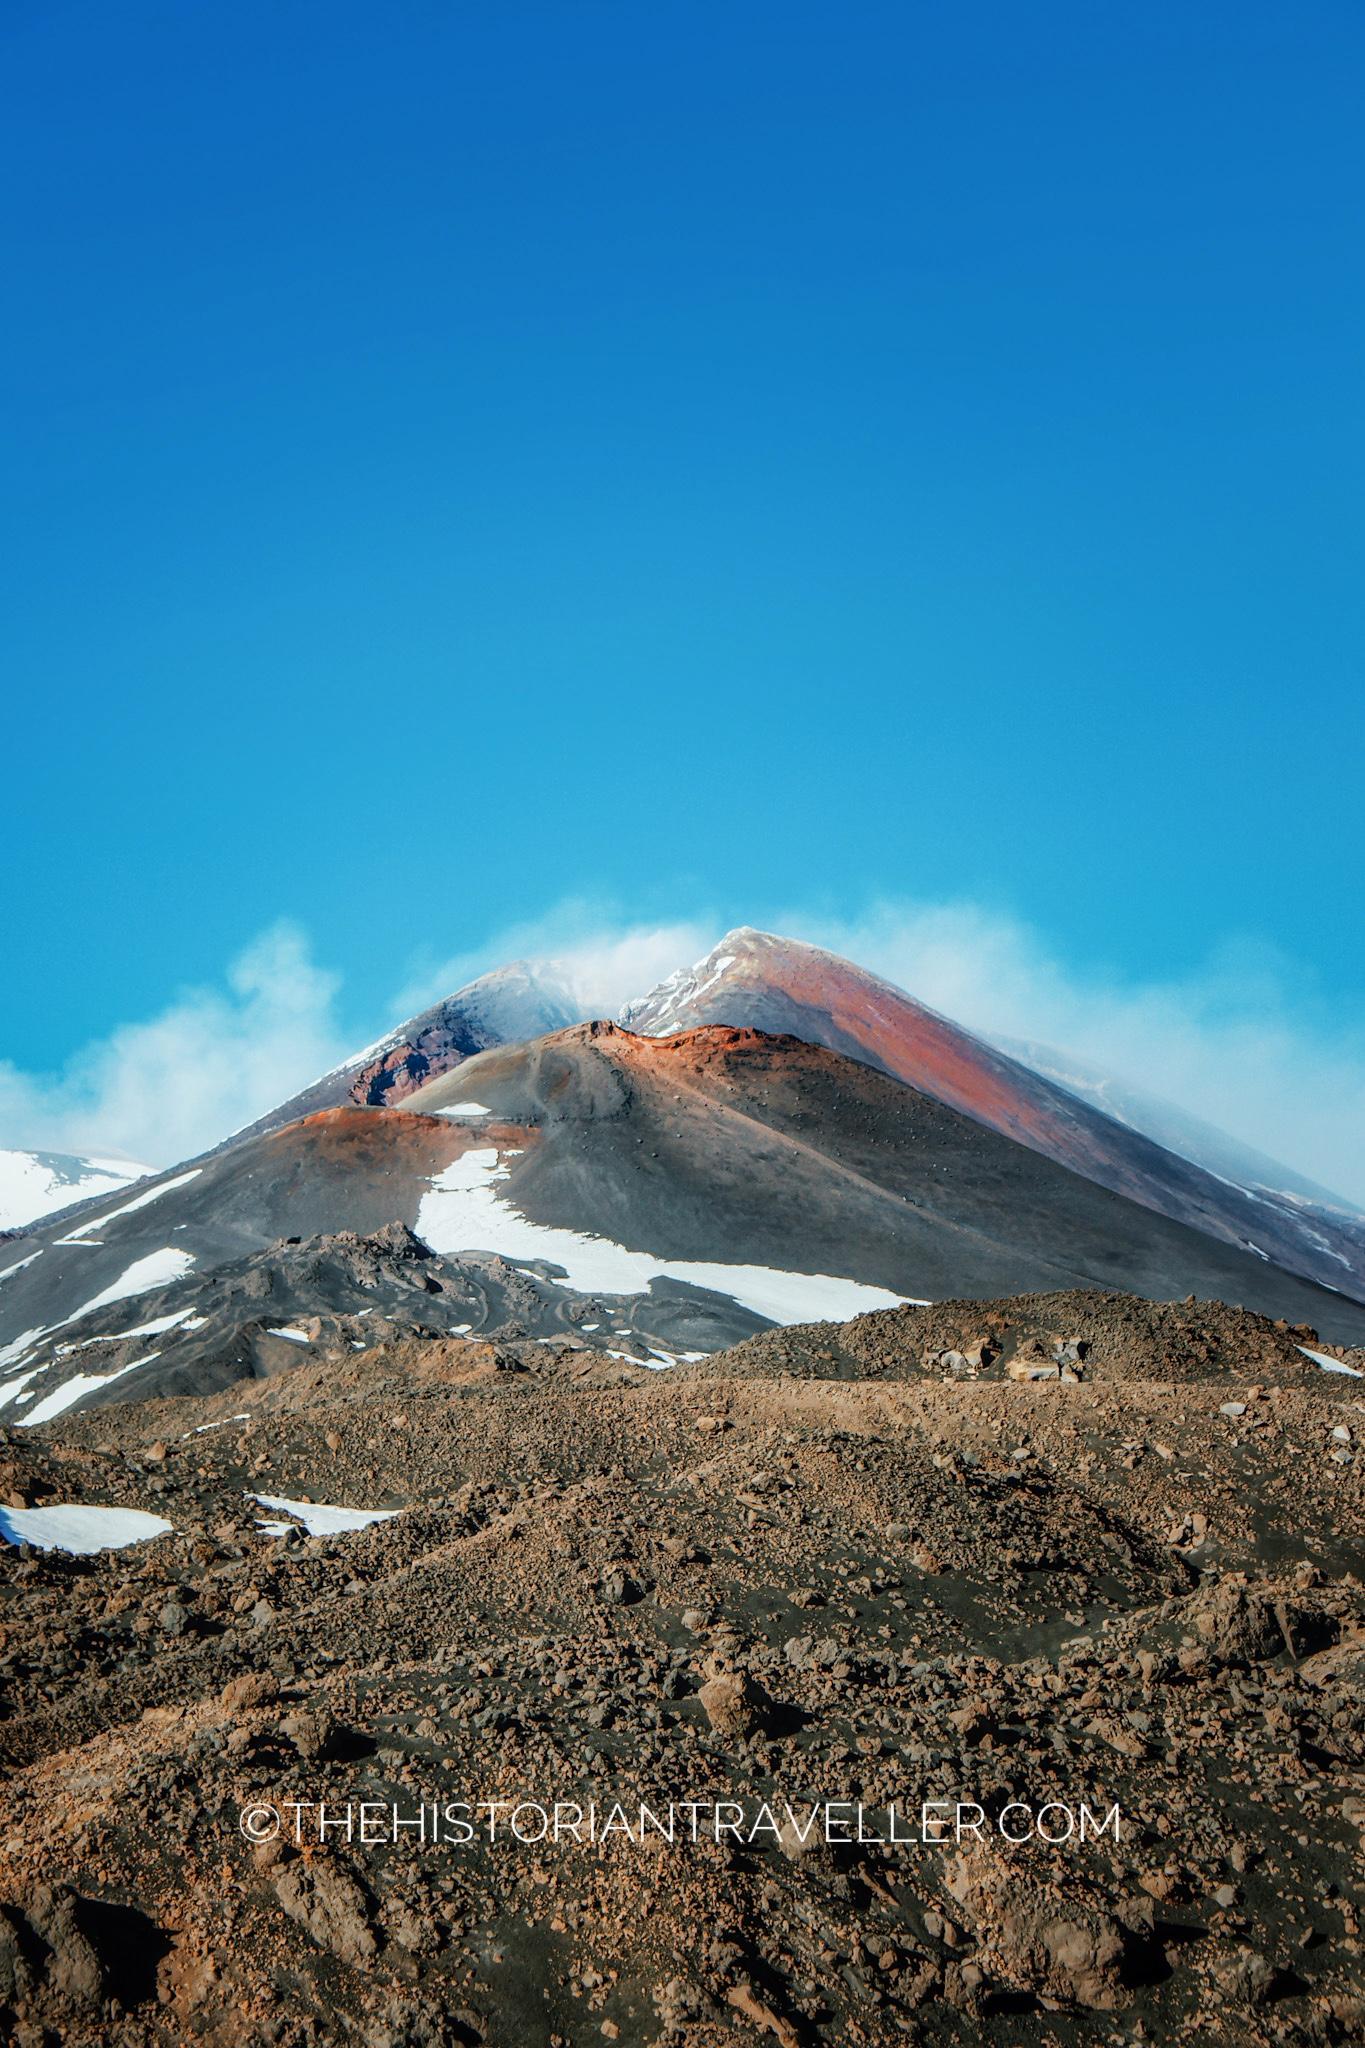 East Sicily Itinerary - View of Mt. Etna at 2,500 metres